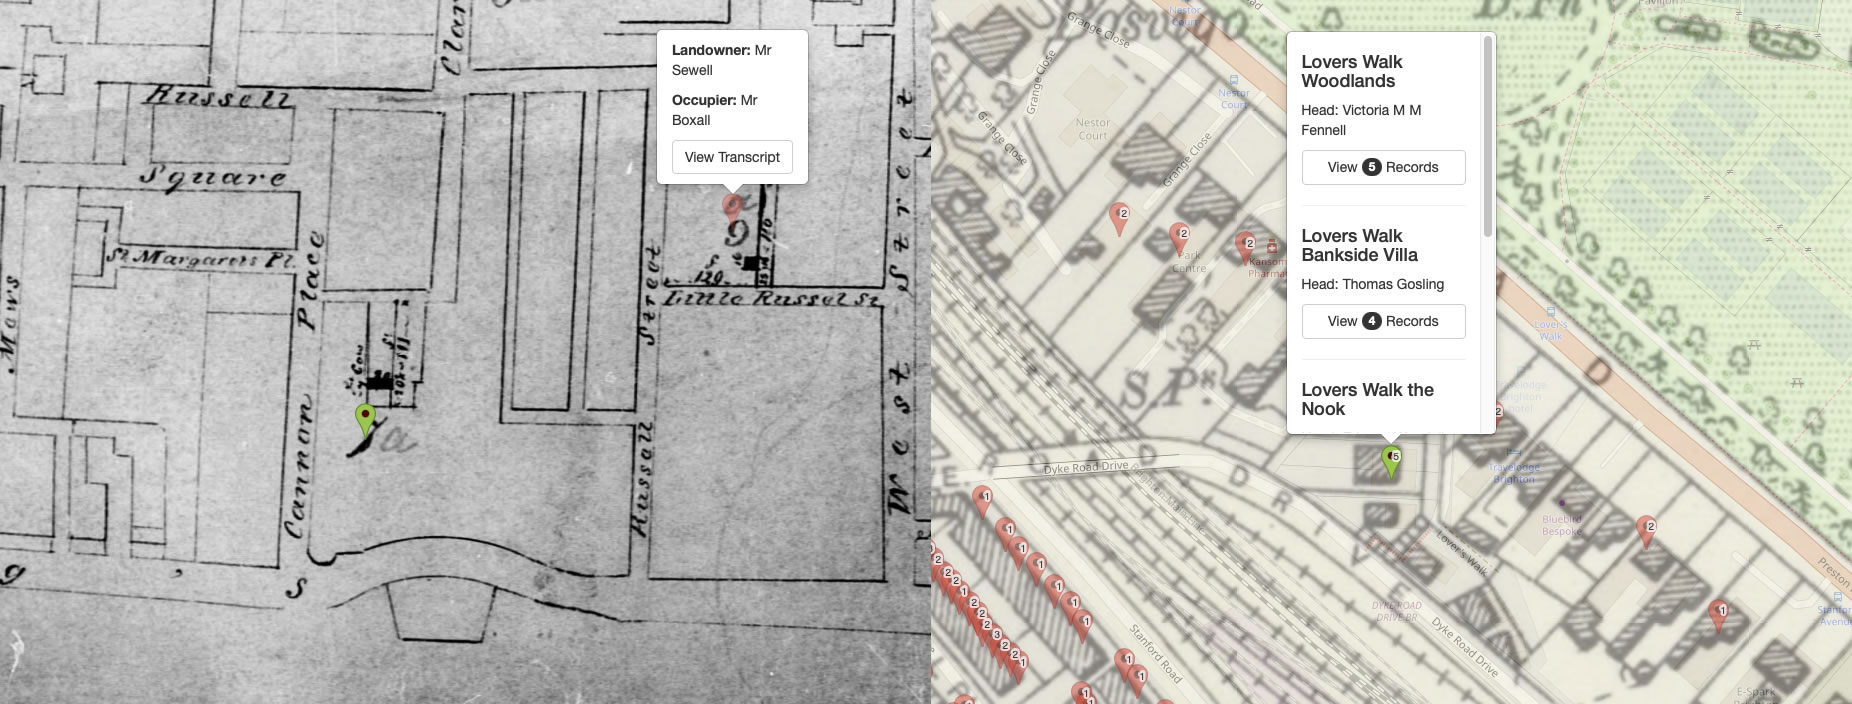 The Genealogist's tithe map here, left, shows Russell Street in the 1850s – where available, there are pins
		which lead to details of landowners and occupants. On the right, the Map Explorer shows Lover's Walk, with
		linked census data showing some residents.